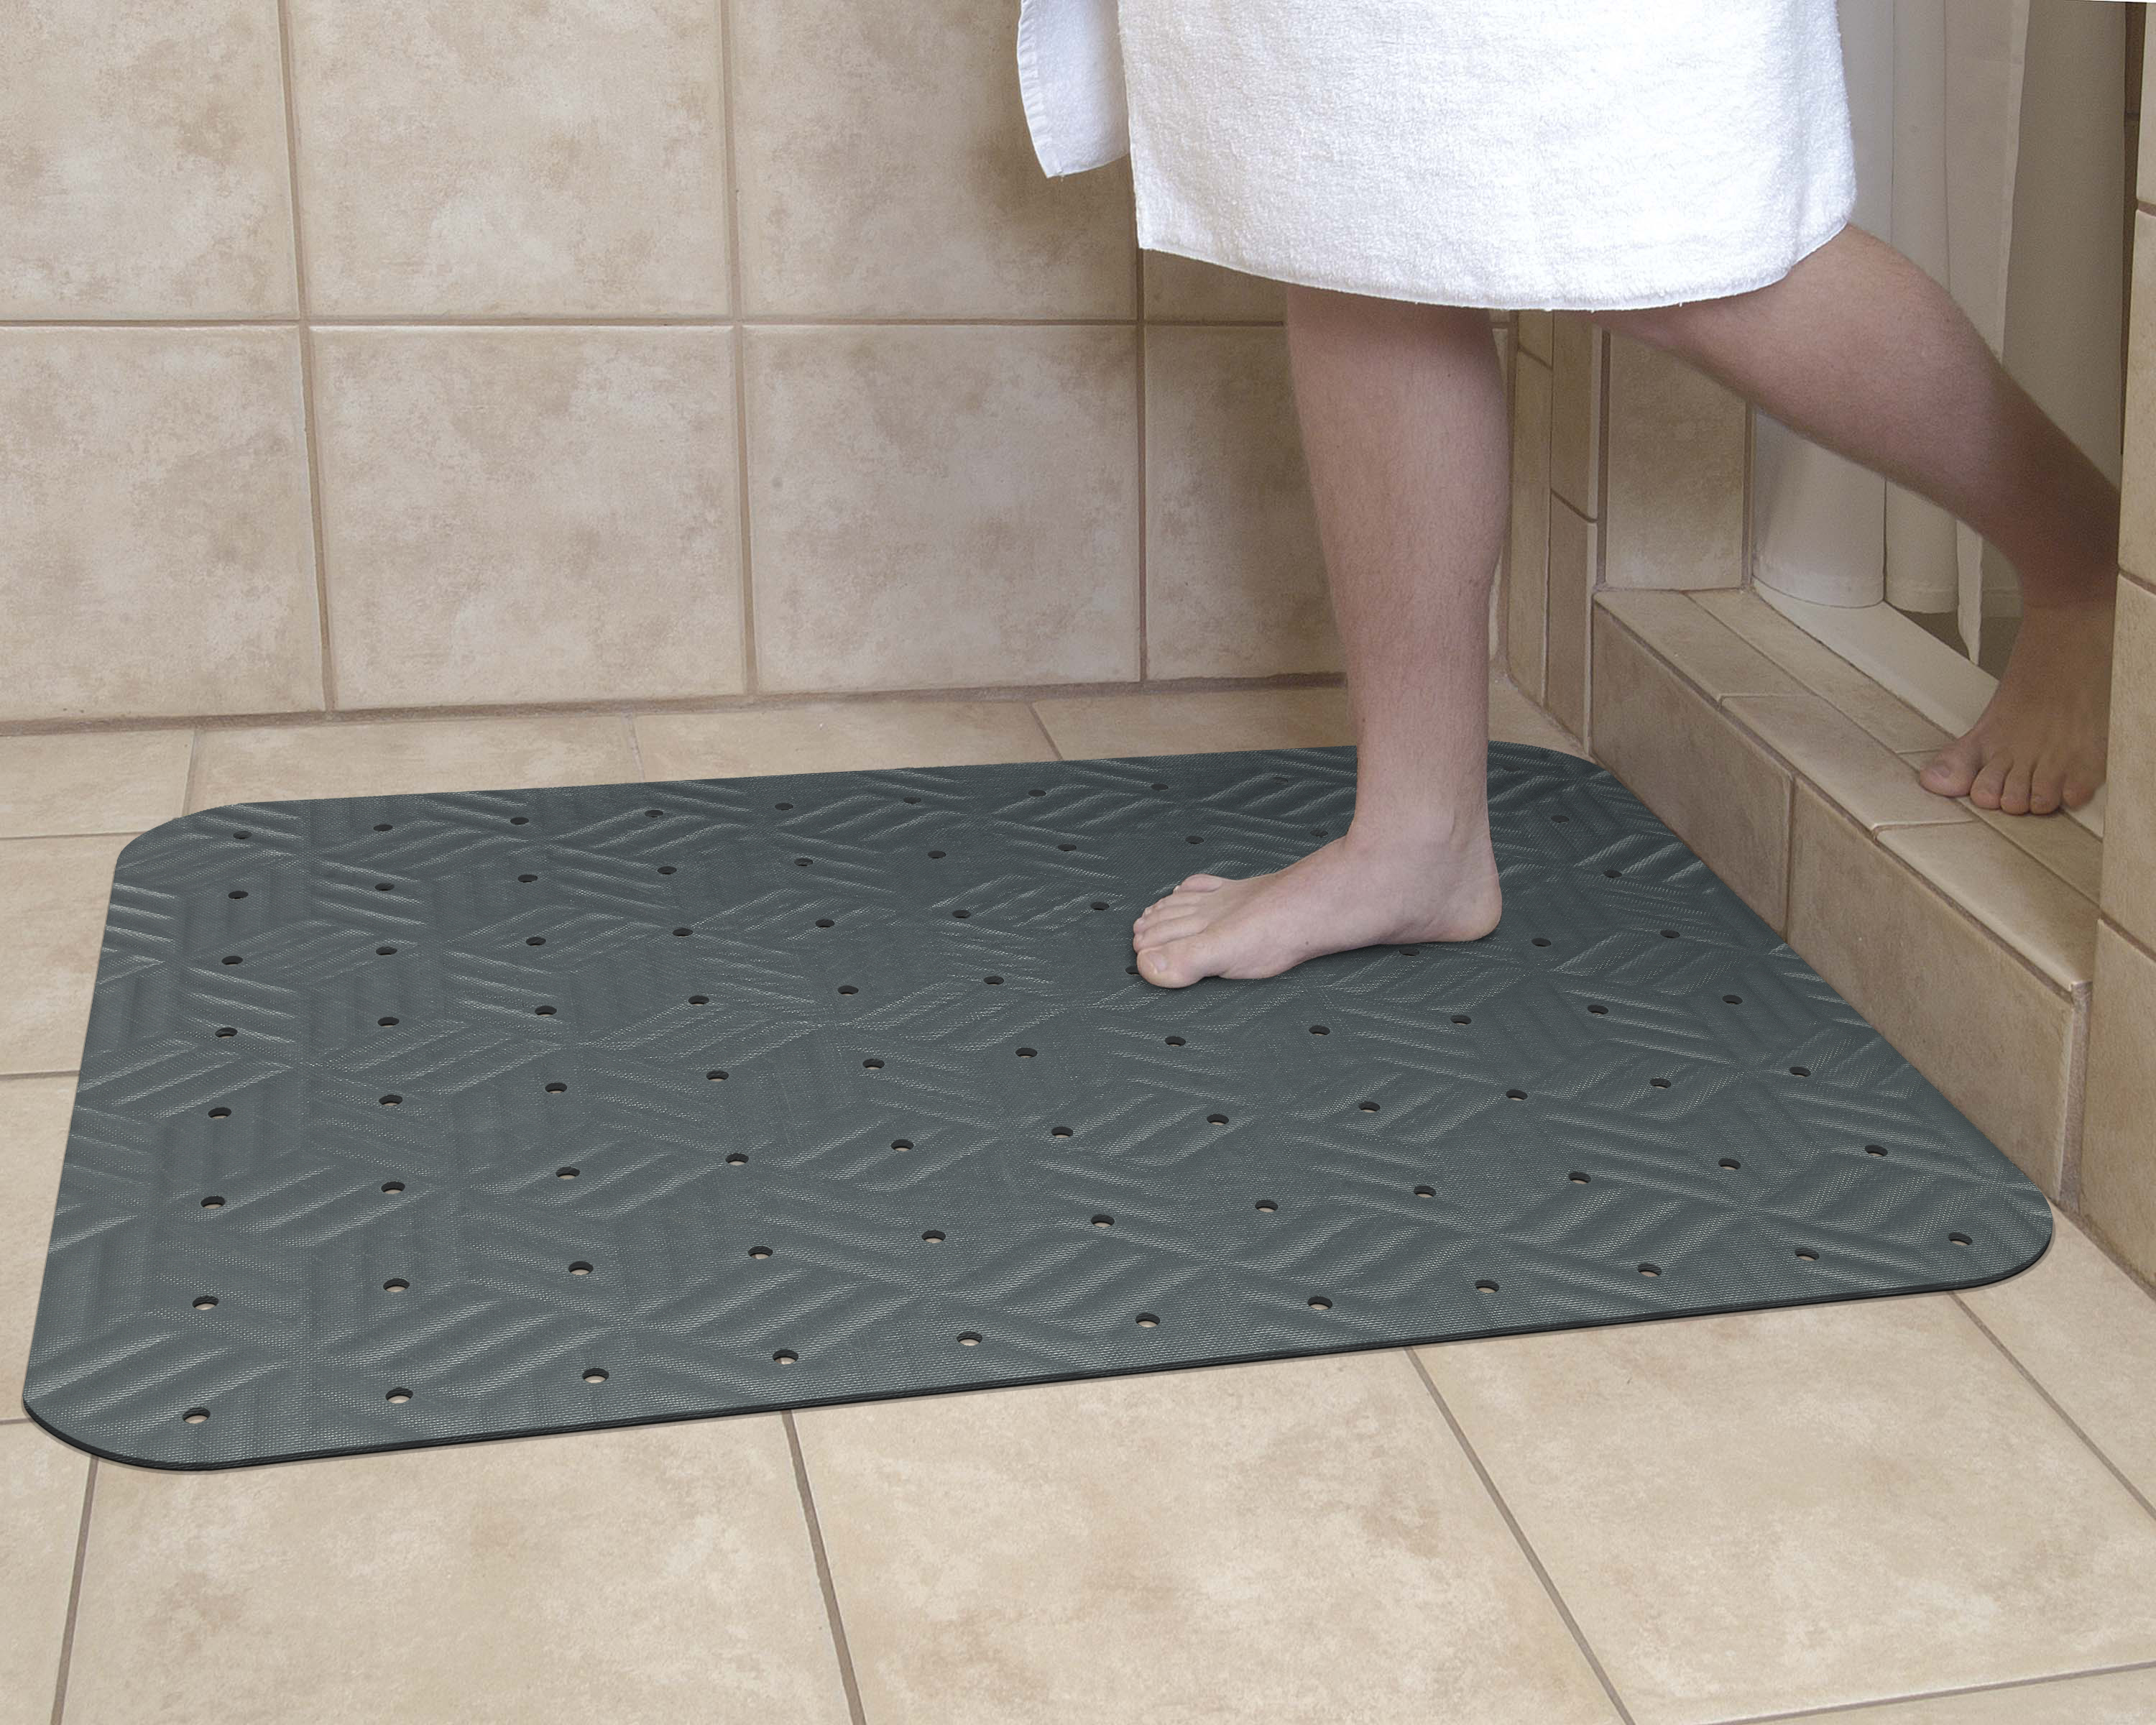 Perforated Rubber Shower Floor Mat